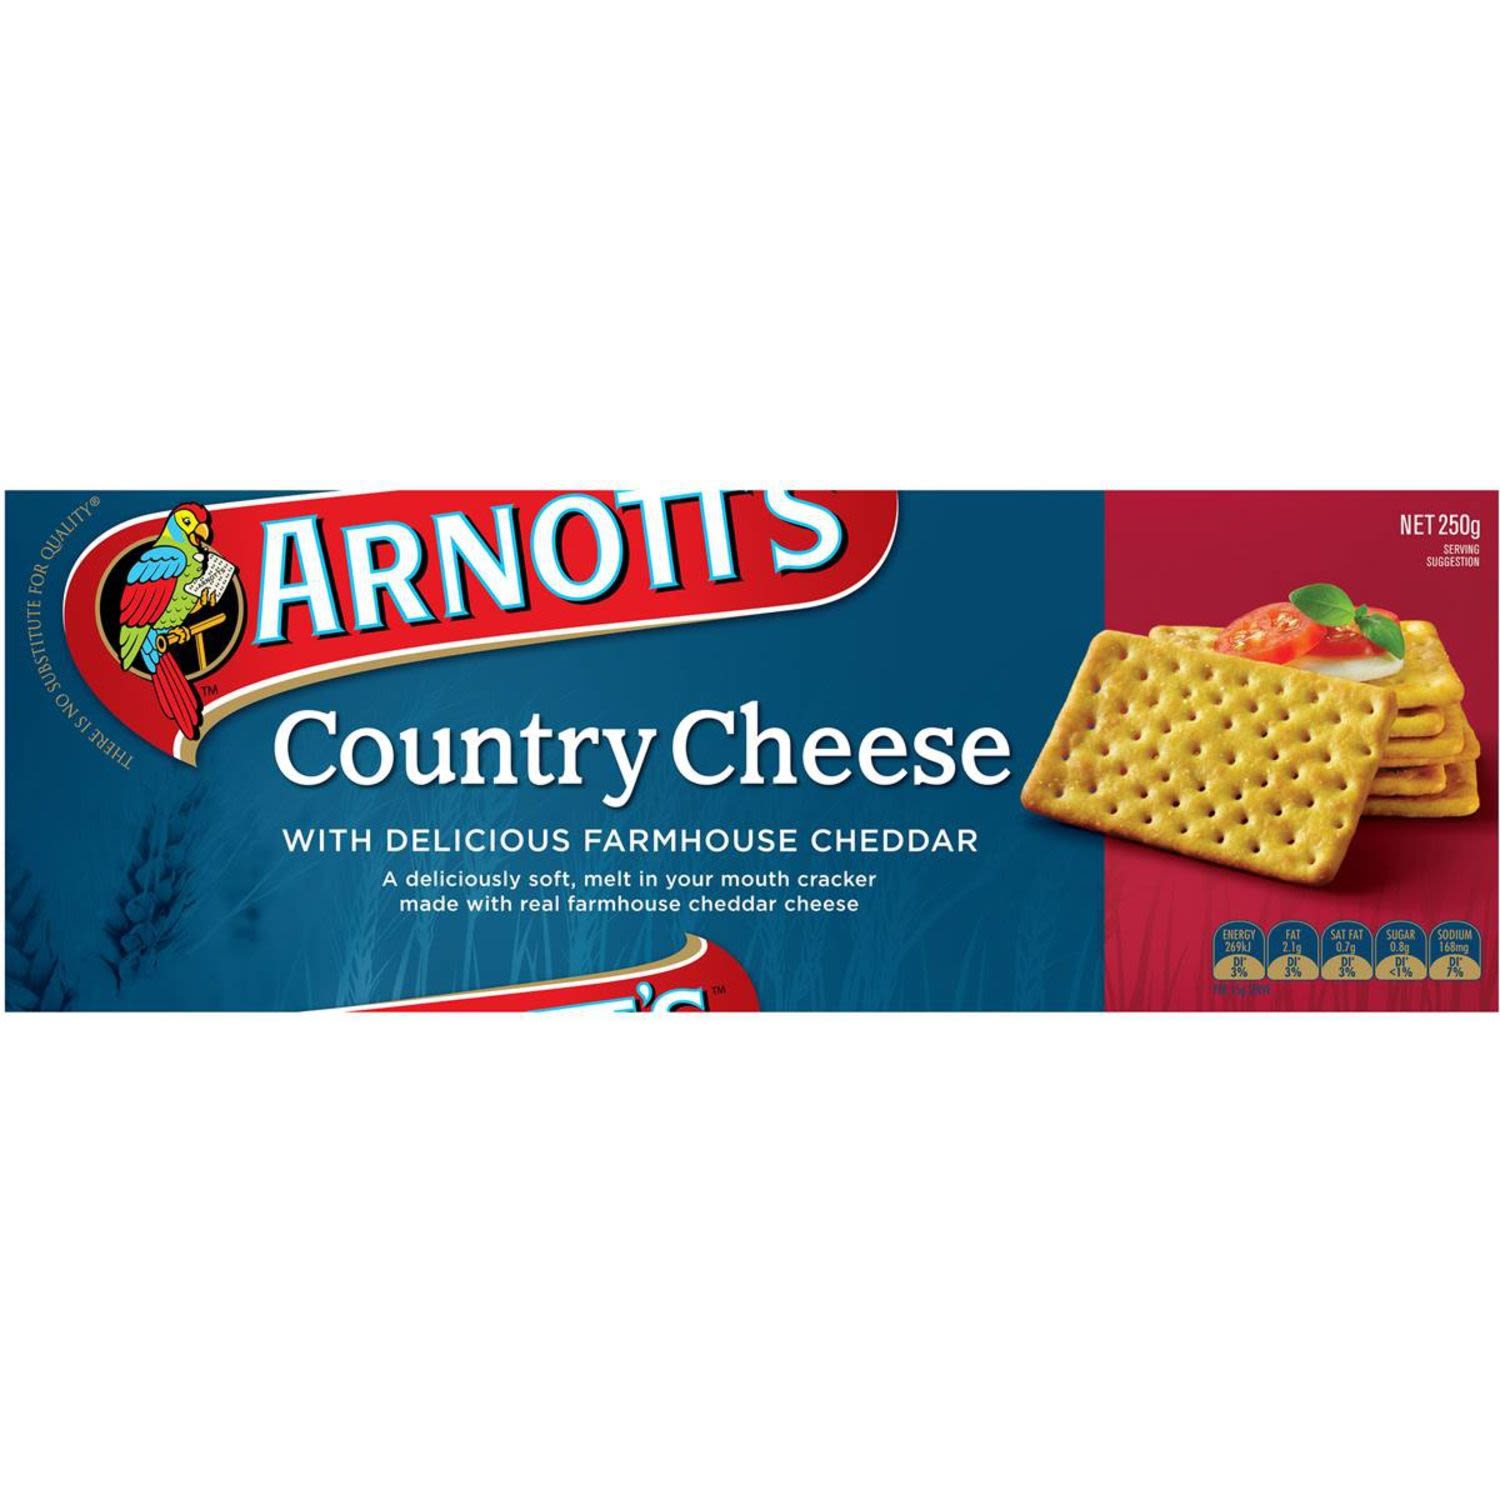 Arnotts Country Cheese Biscuits 250gm